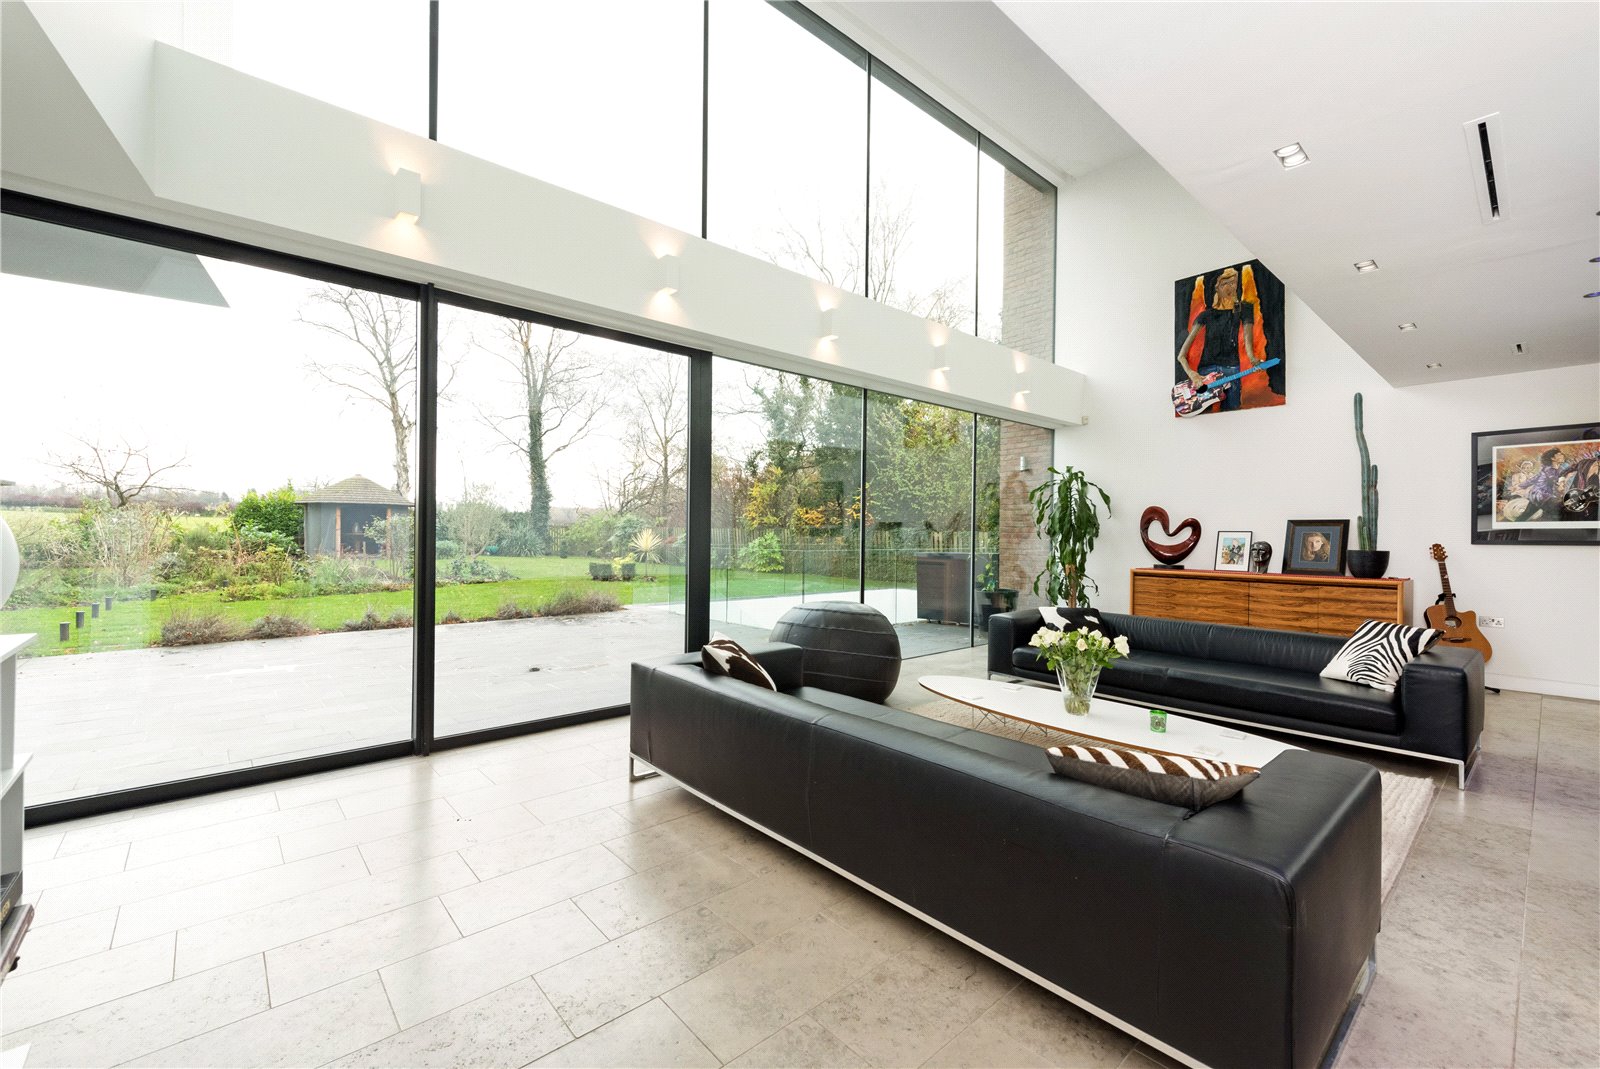 10 hot properties for sale in Greater Manchester | 15th-20th February, The Manc